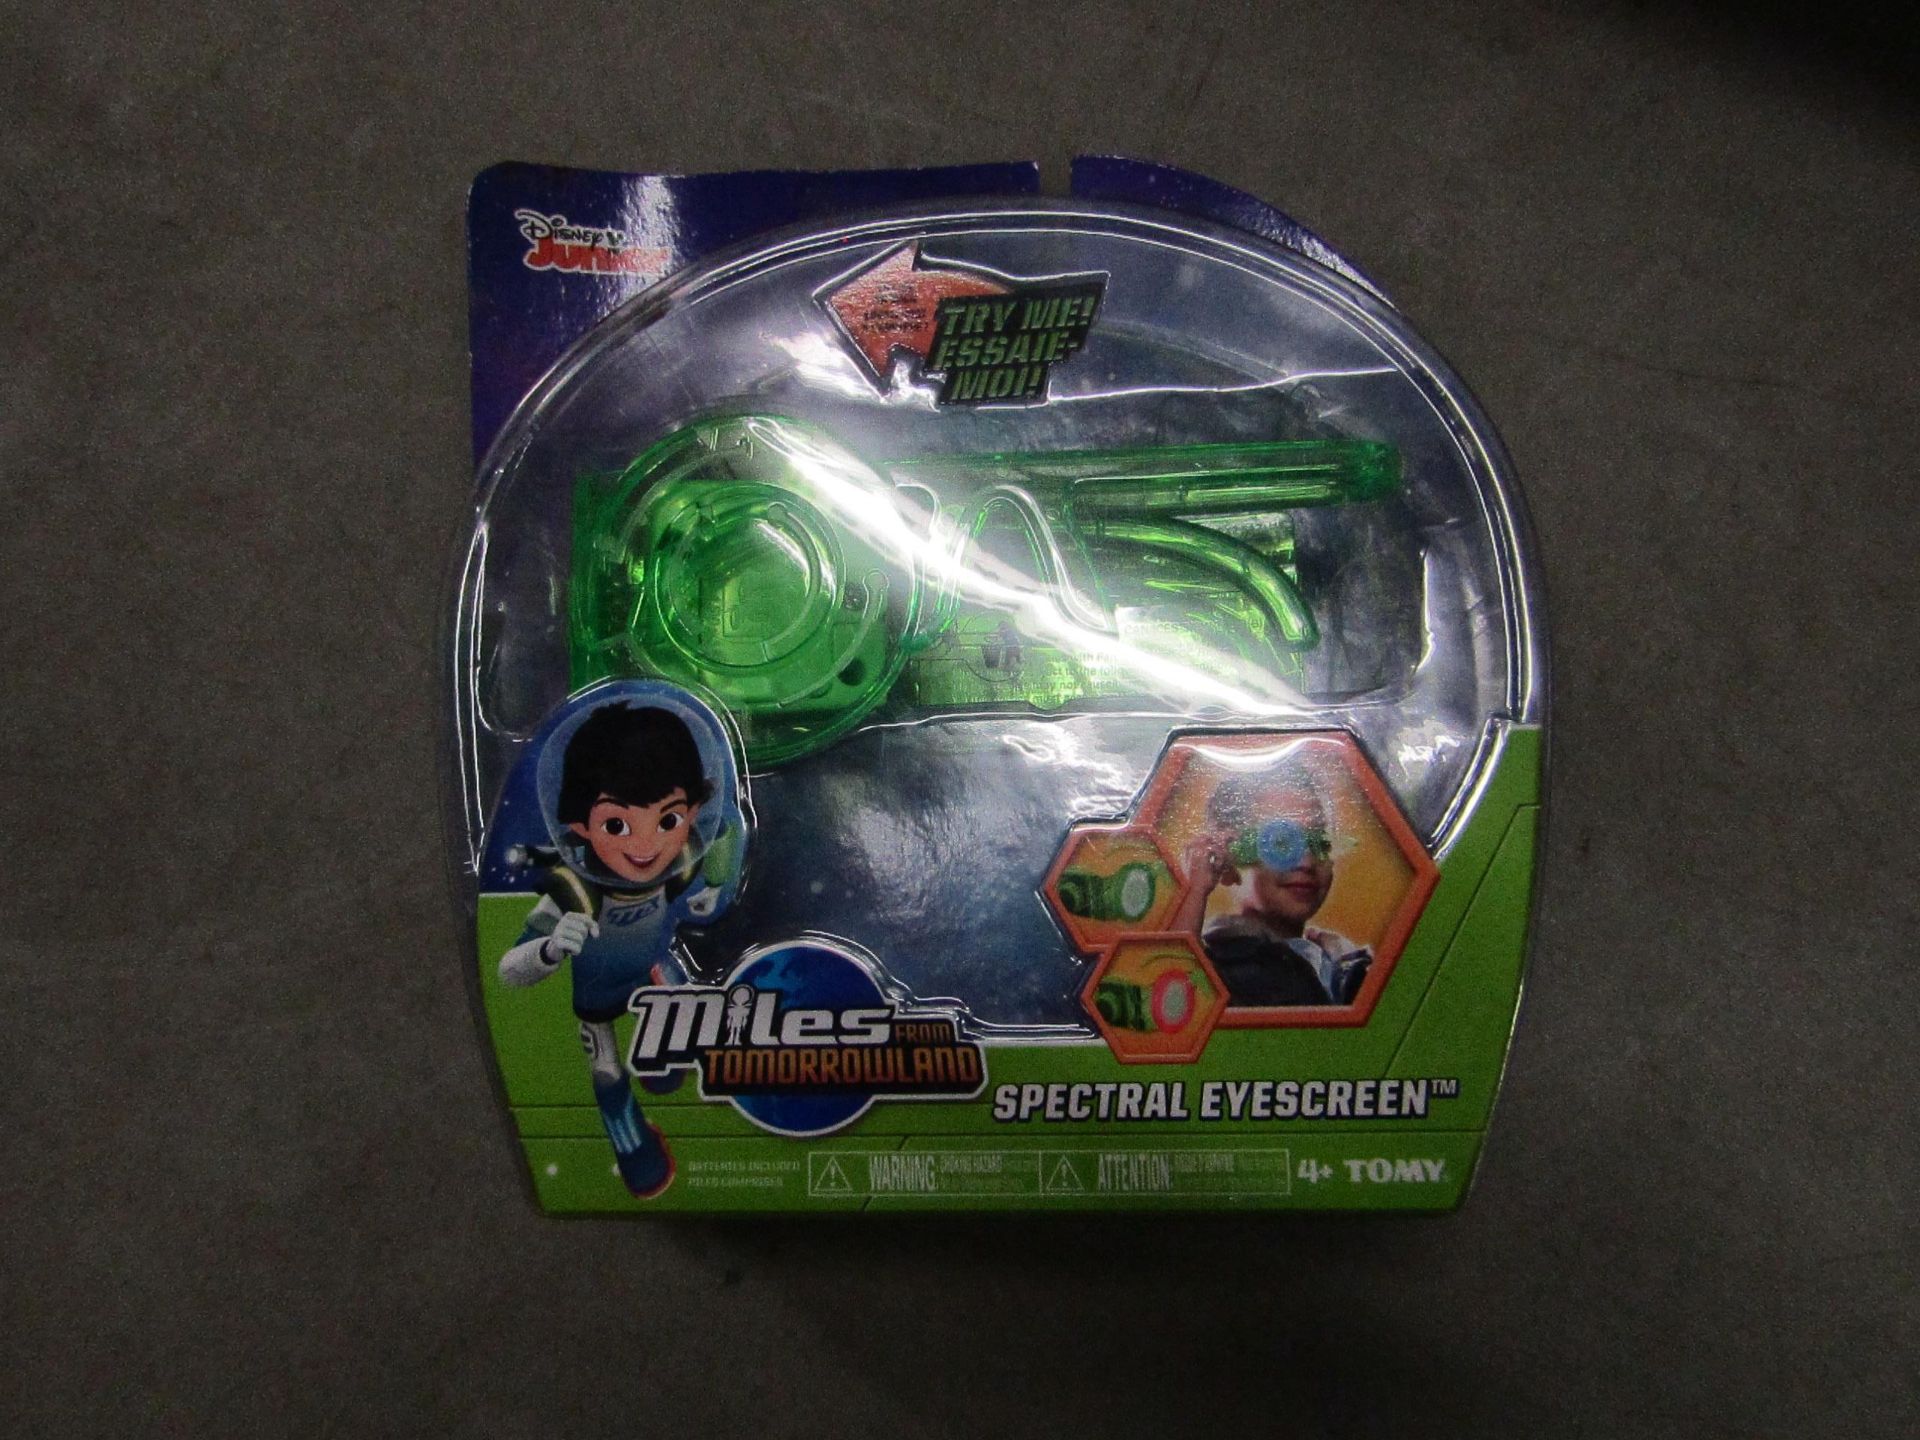 Box of 4 x Disney Miles From Tomorrowland Spectral Eyescreens. New & Packaged